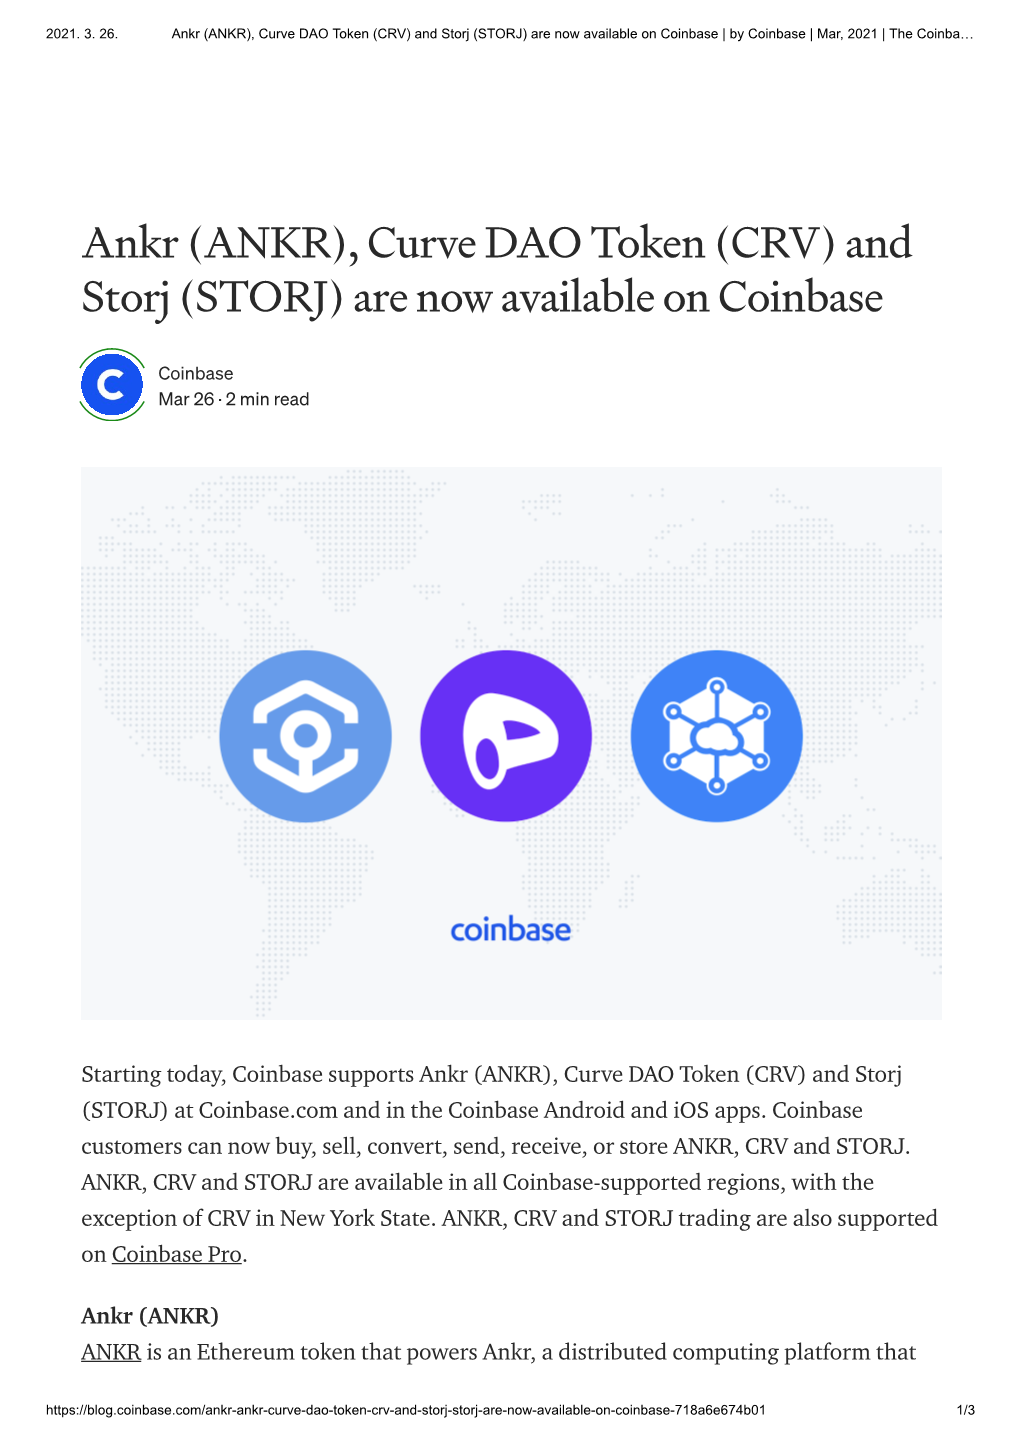 Ankr (ANKR), Curve DAO Token (CRV) and Storj (STORJ) Are Now Available on Coinbase | by Coinbase | Mar, 2021 | the Coinba…